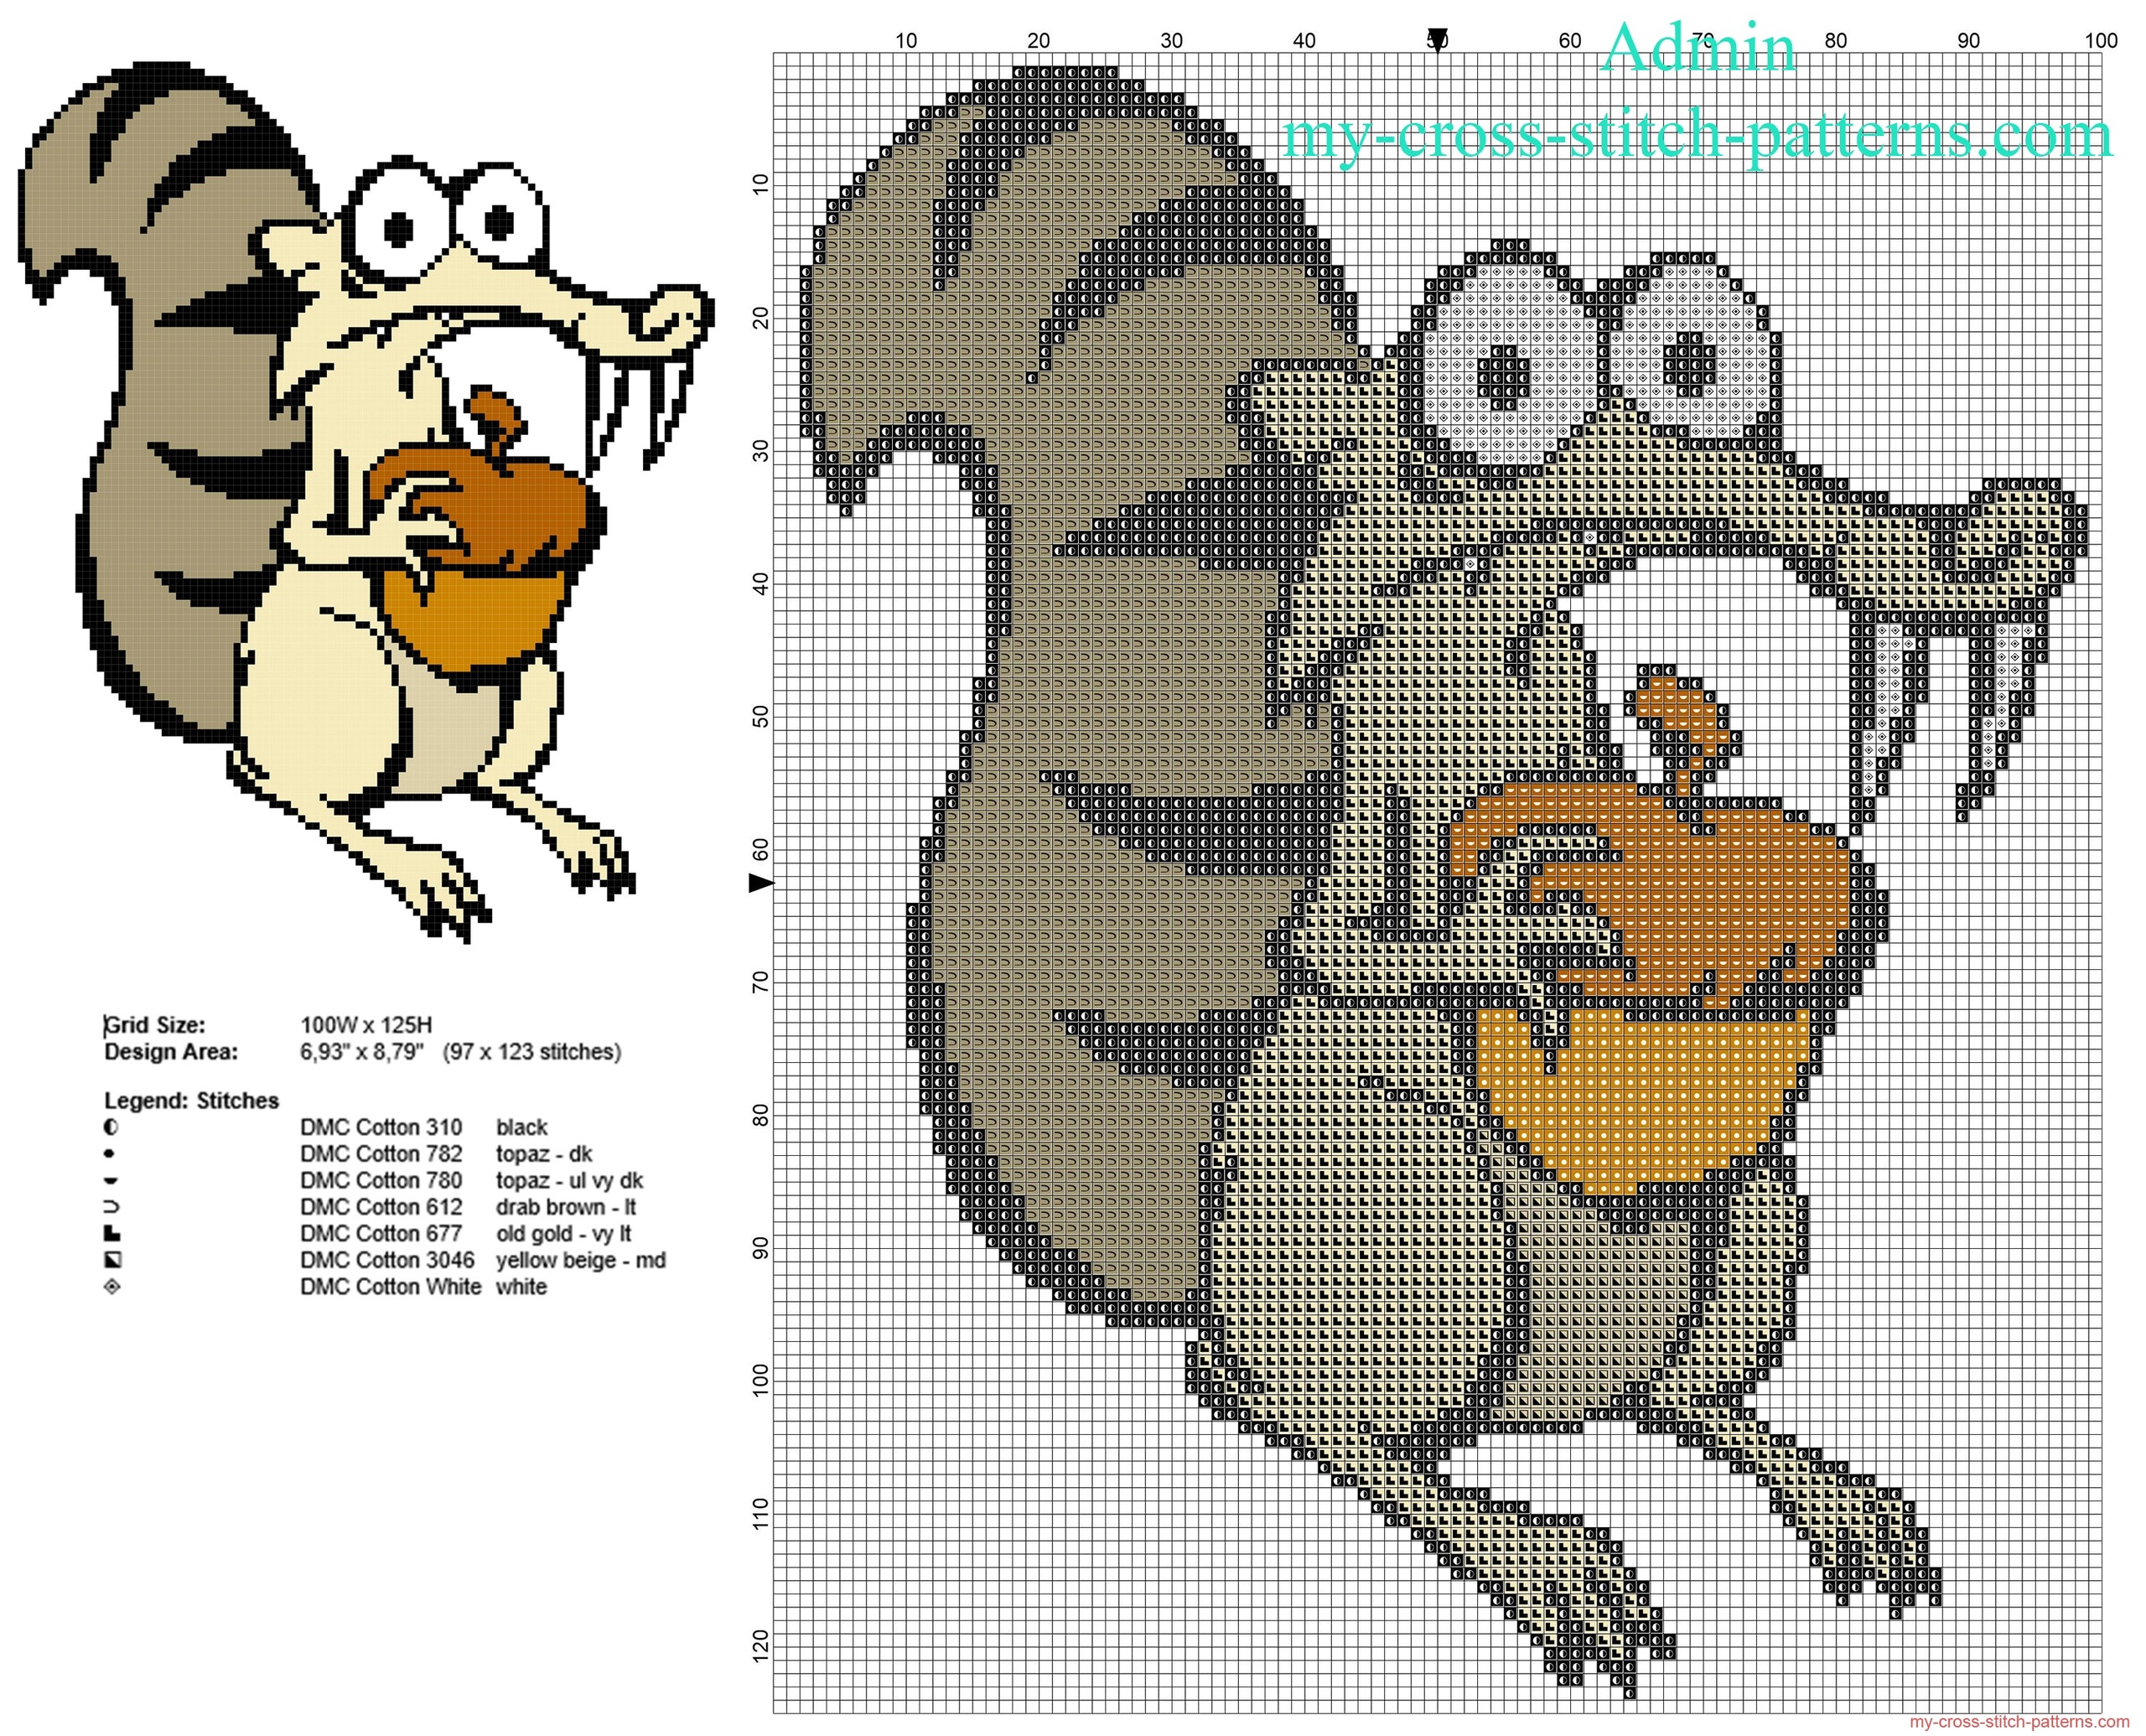 scrat_character_from_ice_age_free_cross_stitch_pattern_download